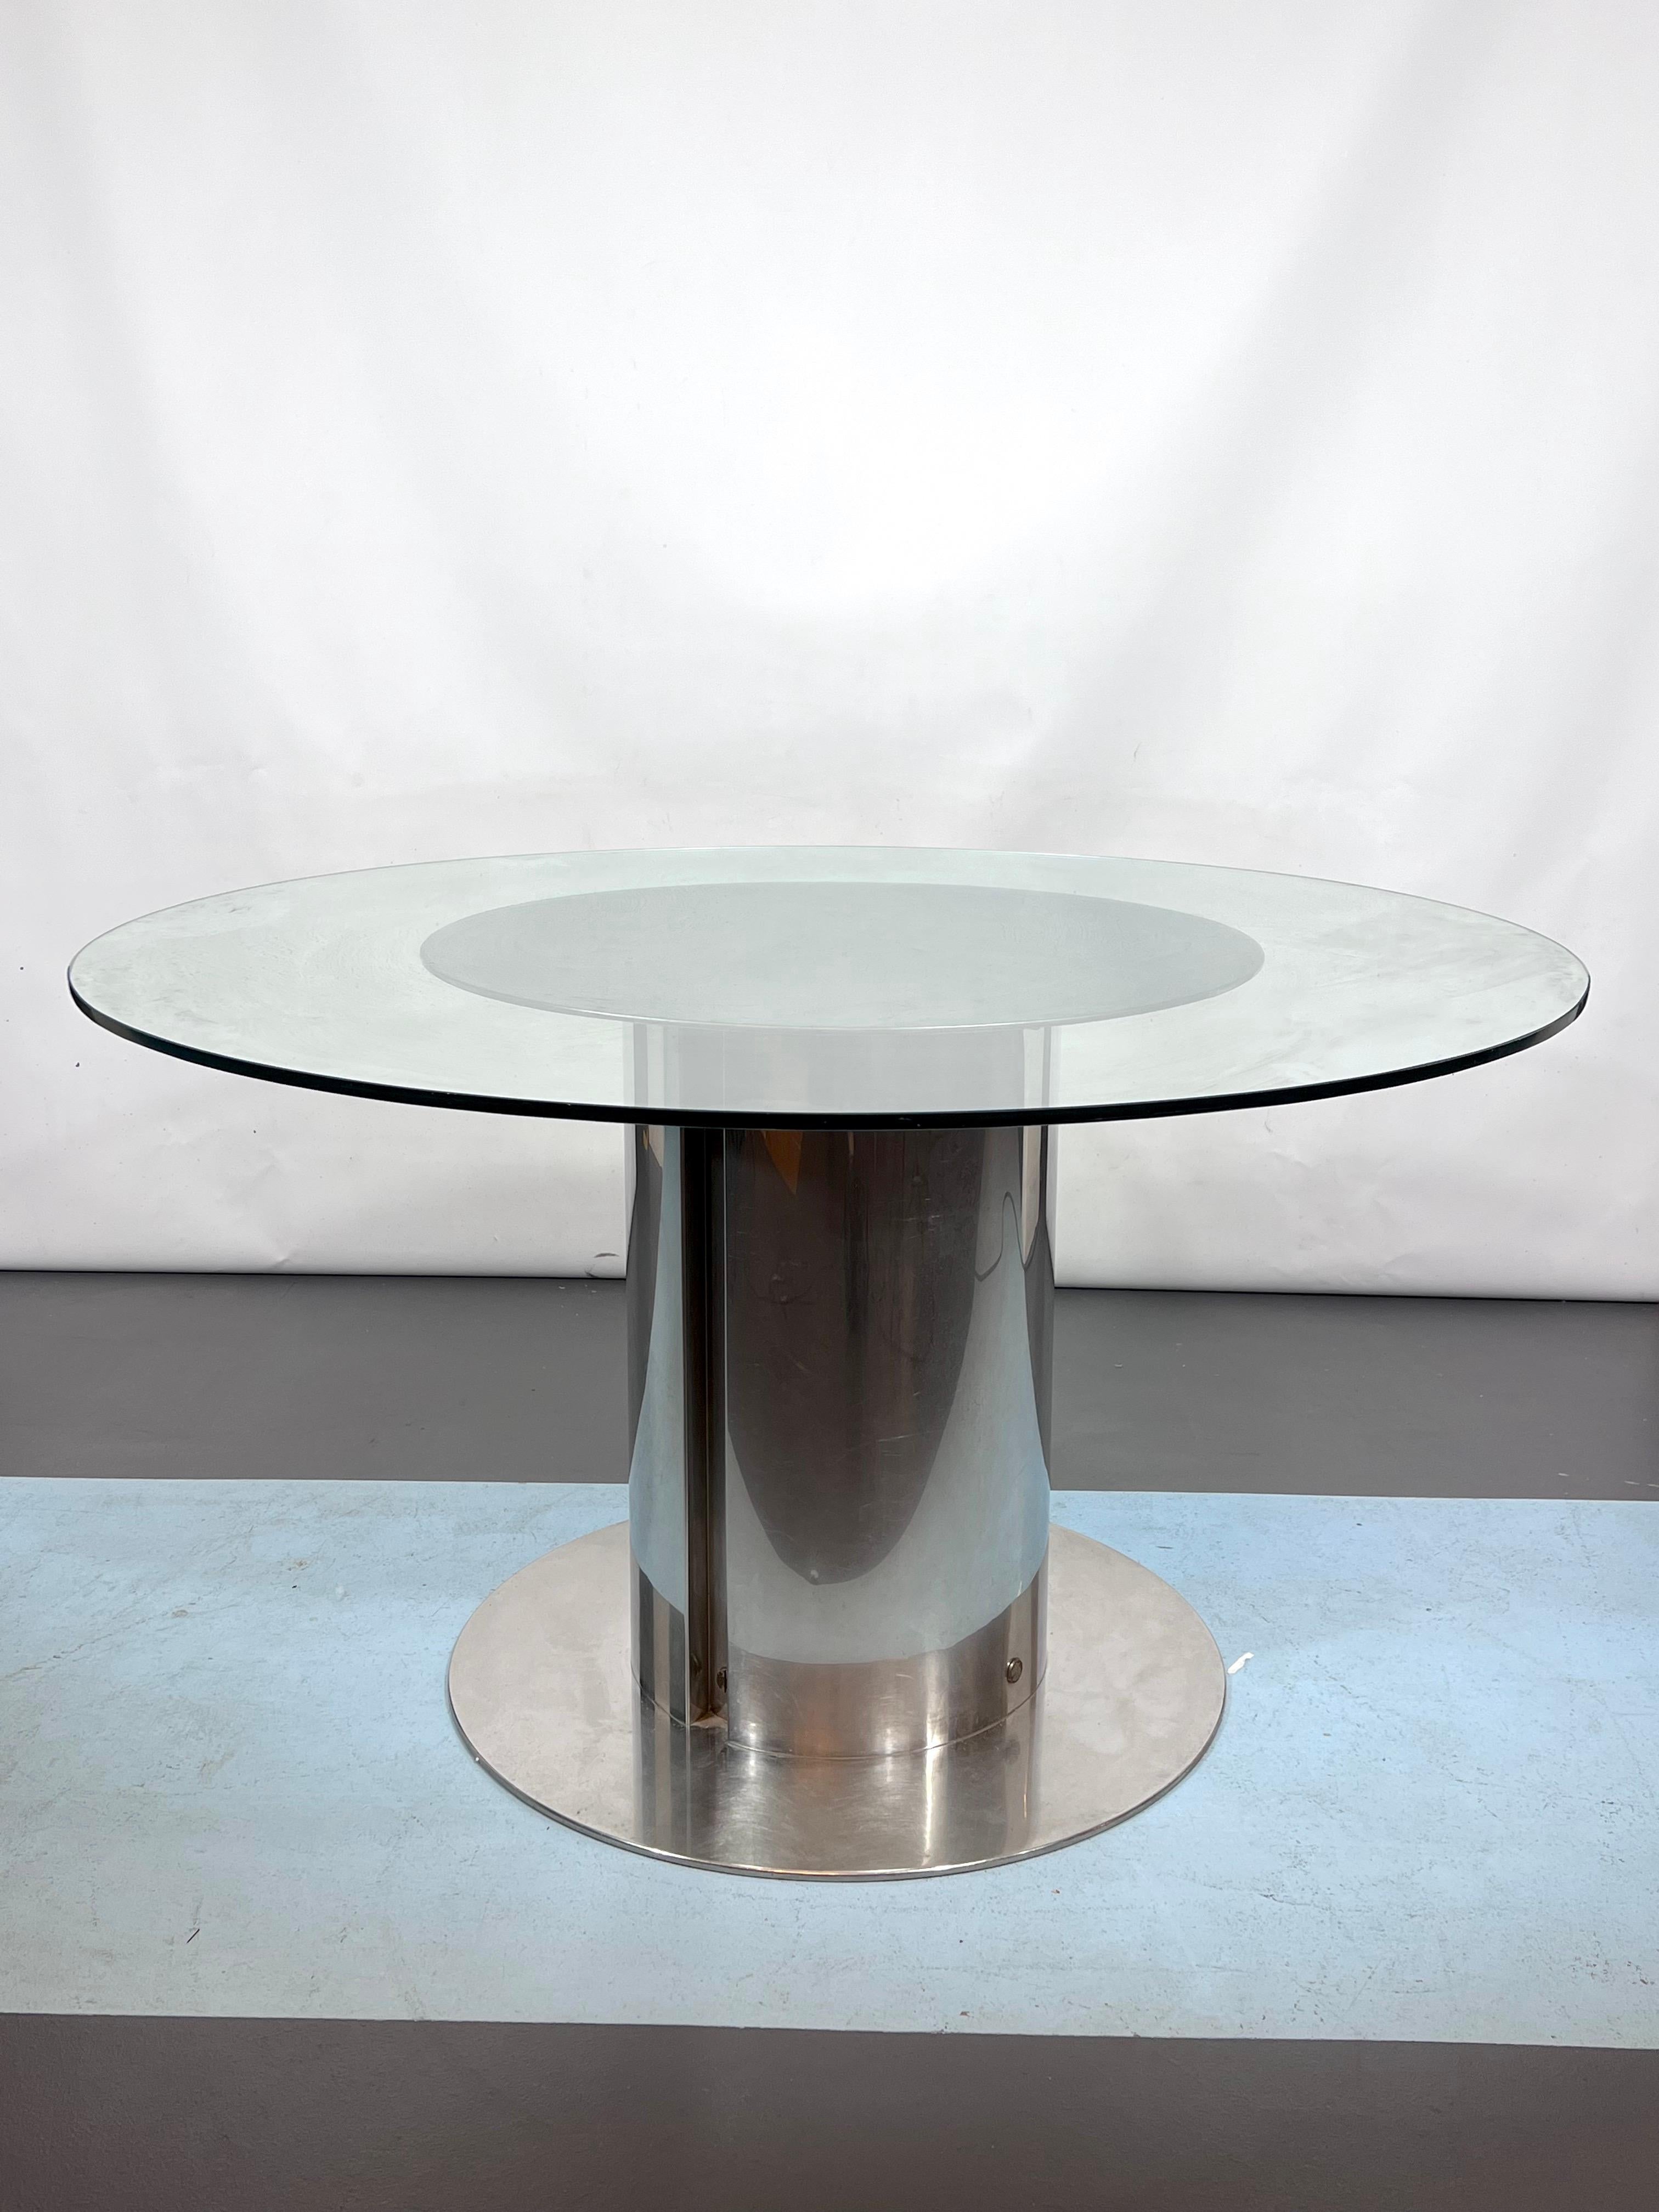 Mid-Century Modern Antonia Astori, Glass and Stainless Steel Dining Table for Driade. Italy 1960s